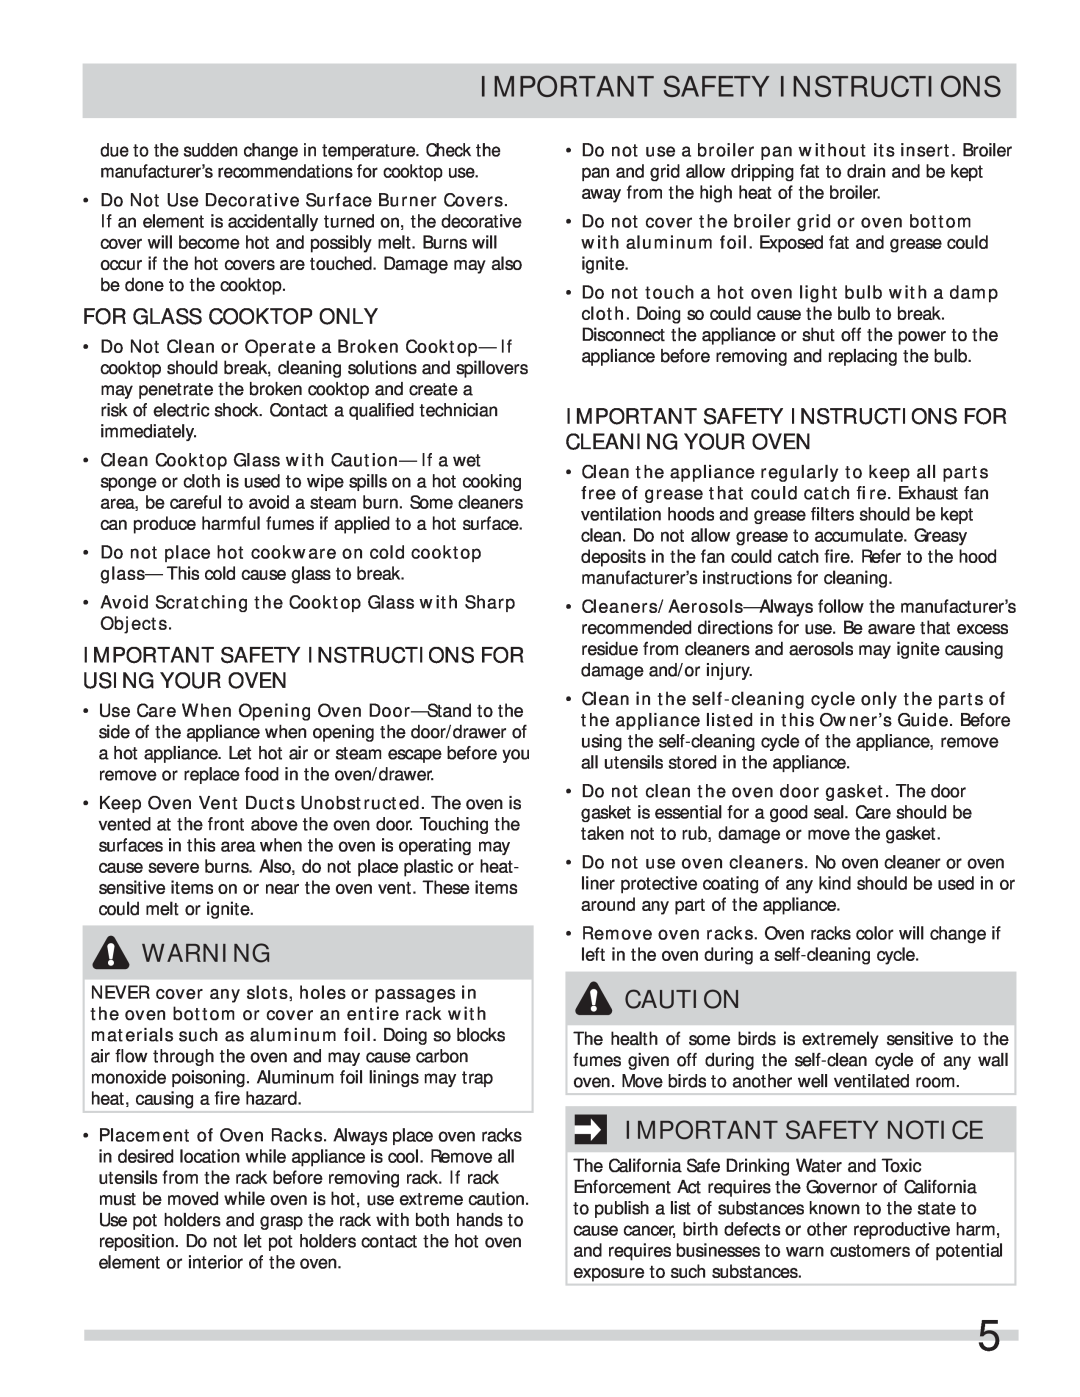 Frigidaire FPEF4085KF Important Safety Notice, For Glass Cooktop Only, Important Safety Instructions For Using Your Oven 